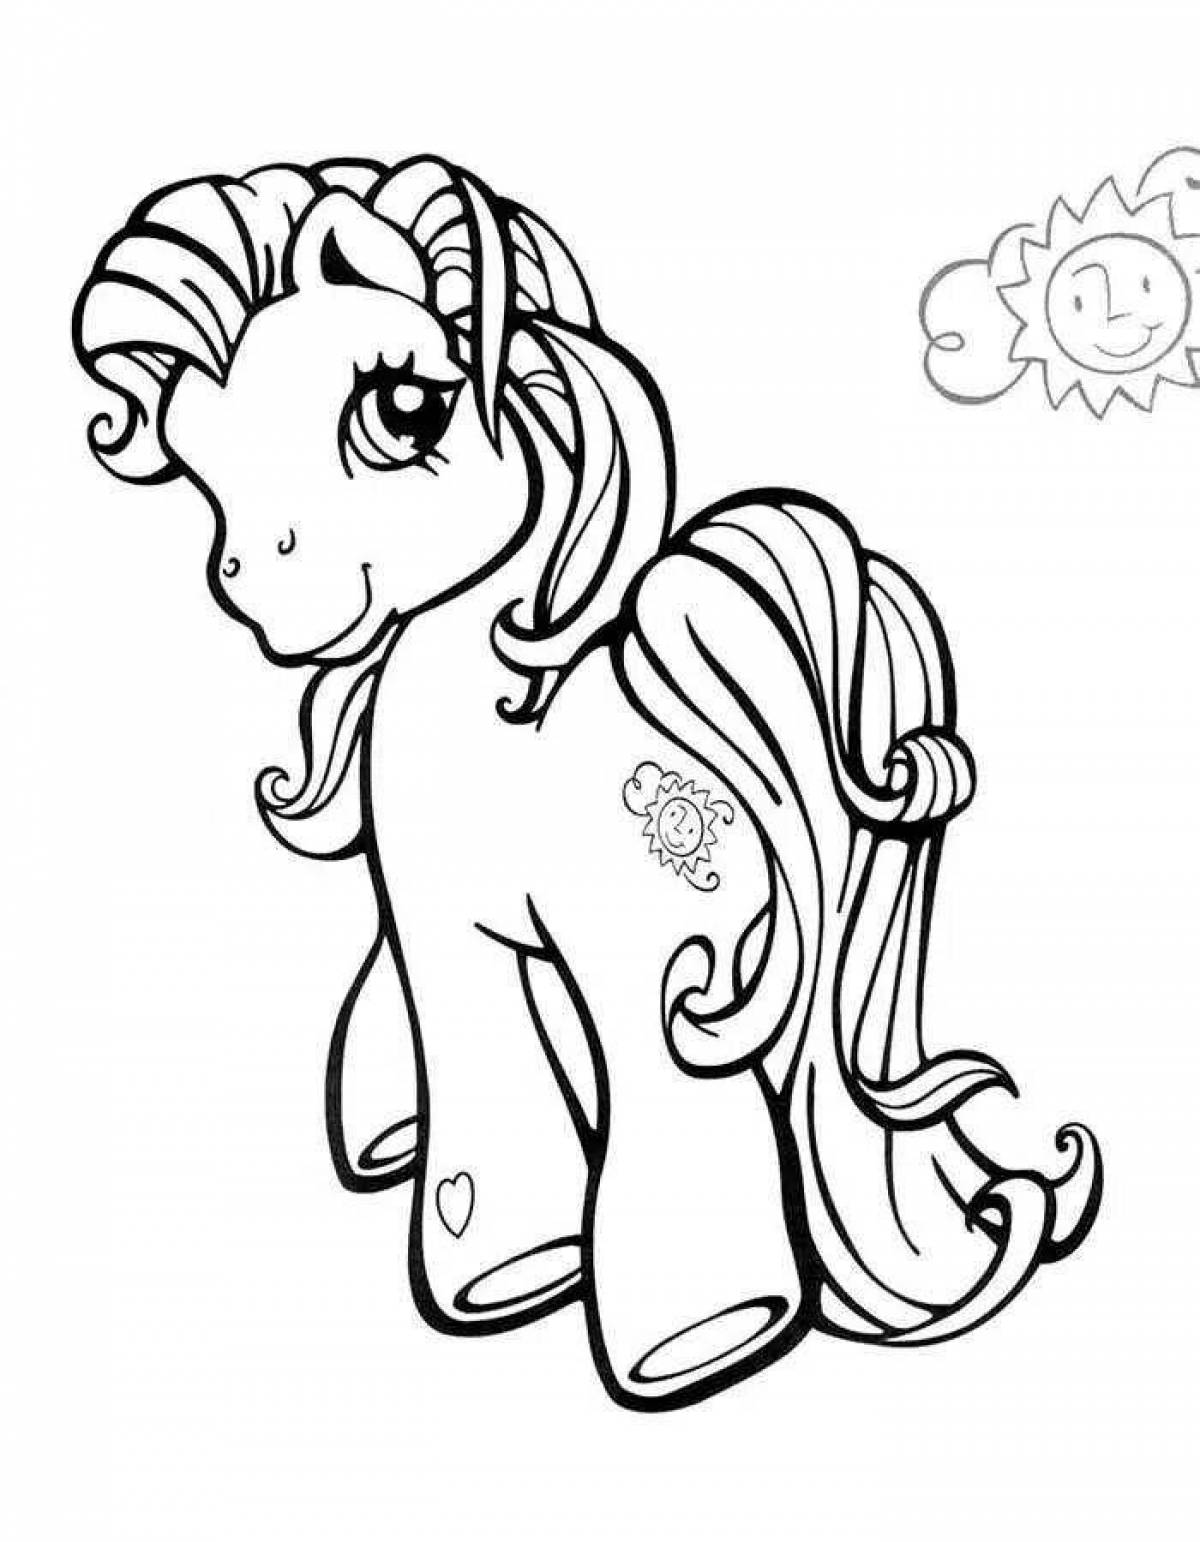 Delightful coloring pony horse